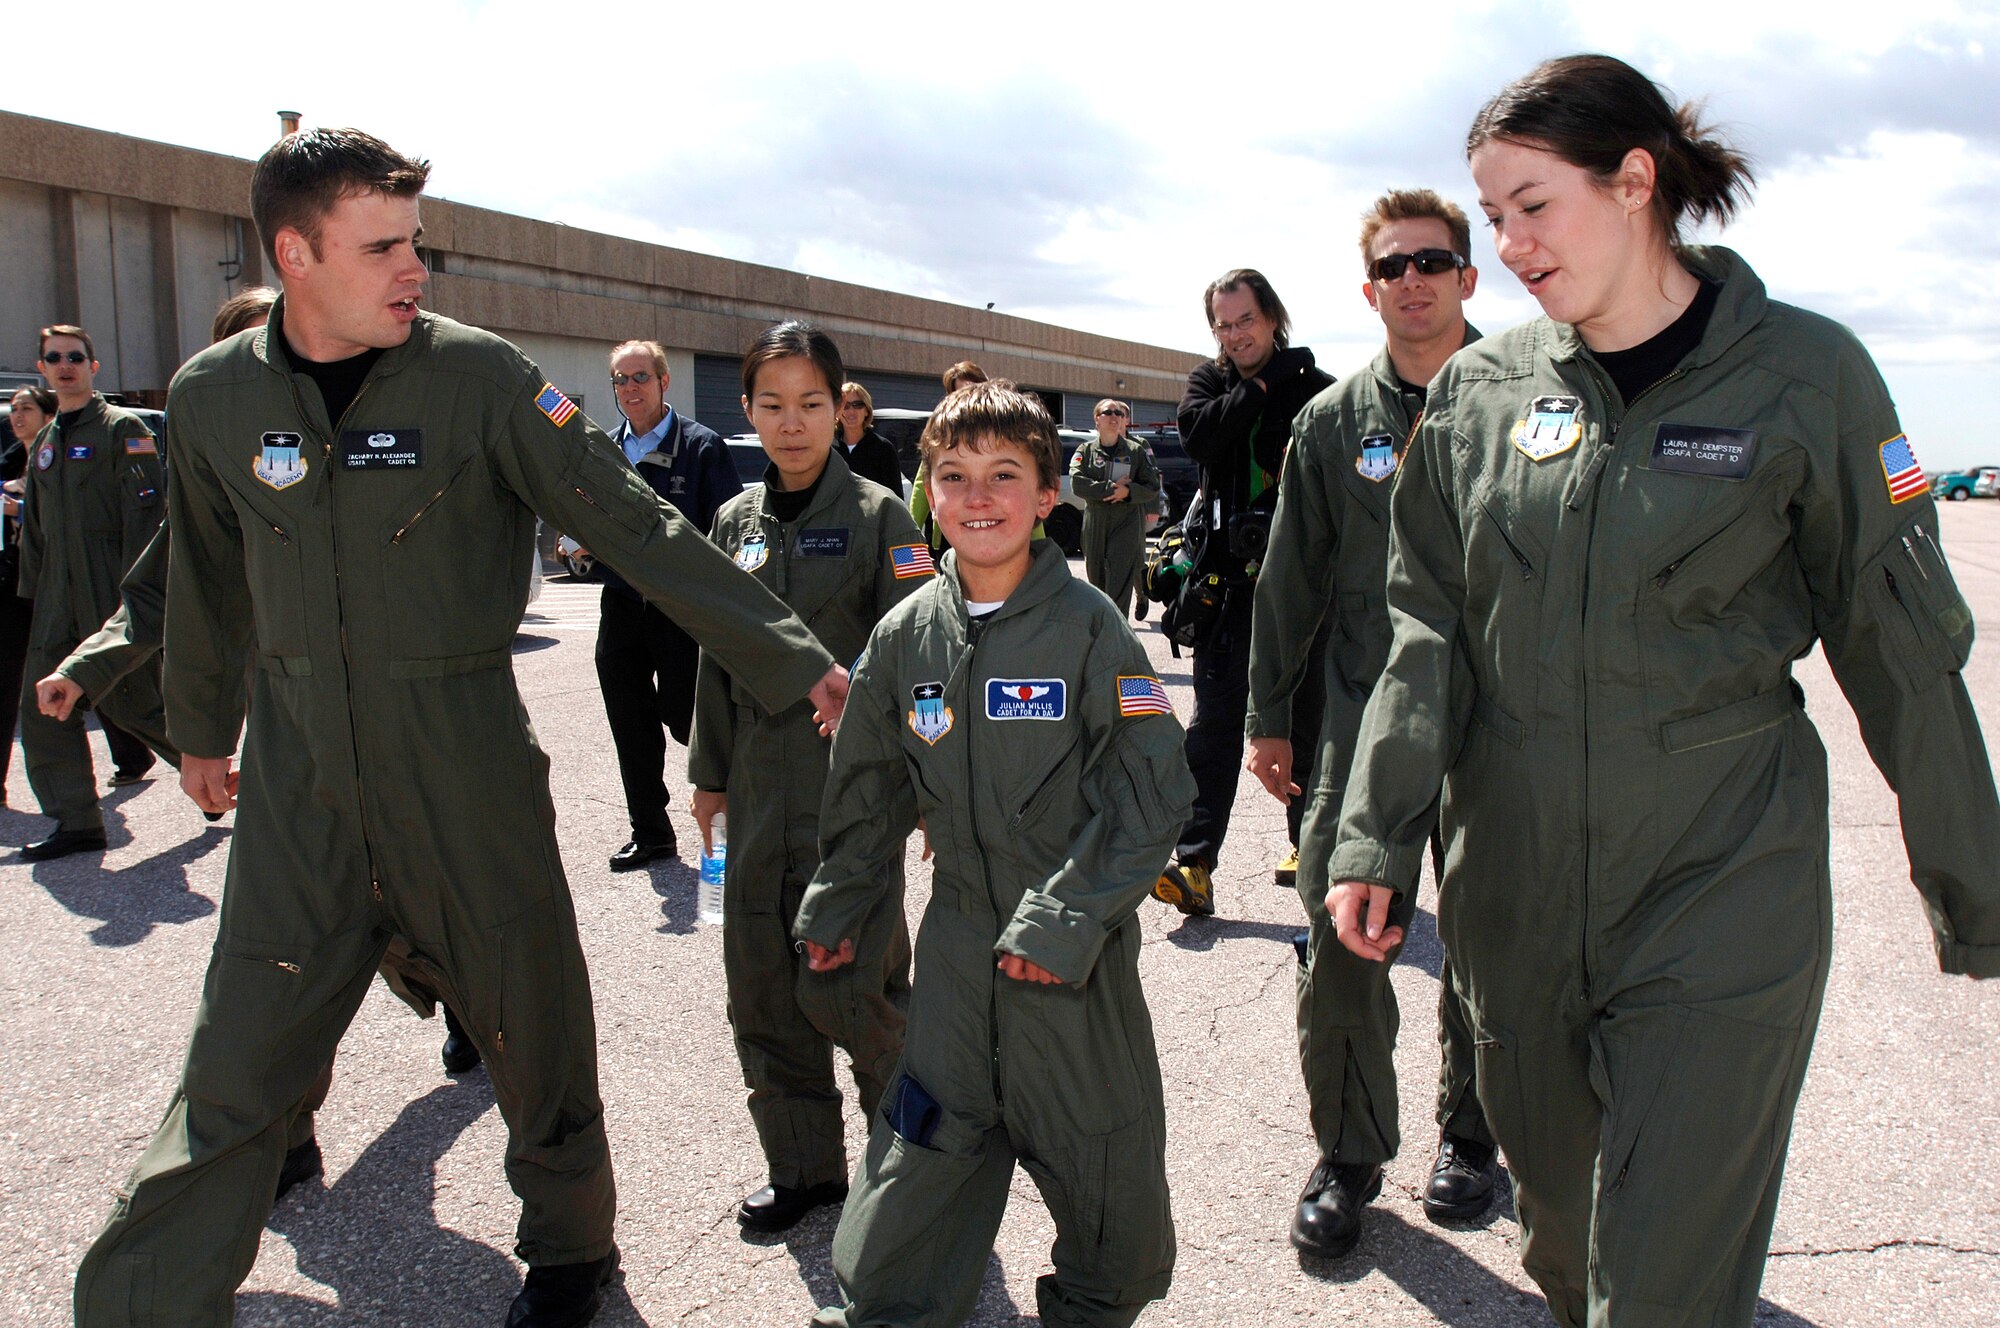 Ten-year-old Julian Willis walks out to the parachute landing zone during his three-day visit to the U.S. Air Force Academy, Colo. The Make-a-Wish Foundation and the Air Force Academy made Julian a "Cadet for a Day". Cadets have sponsored 22 children since the program started in 2000. (U.S. Air Force photo/Mike Kaplan)